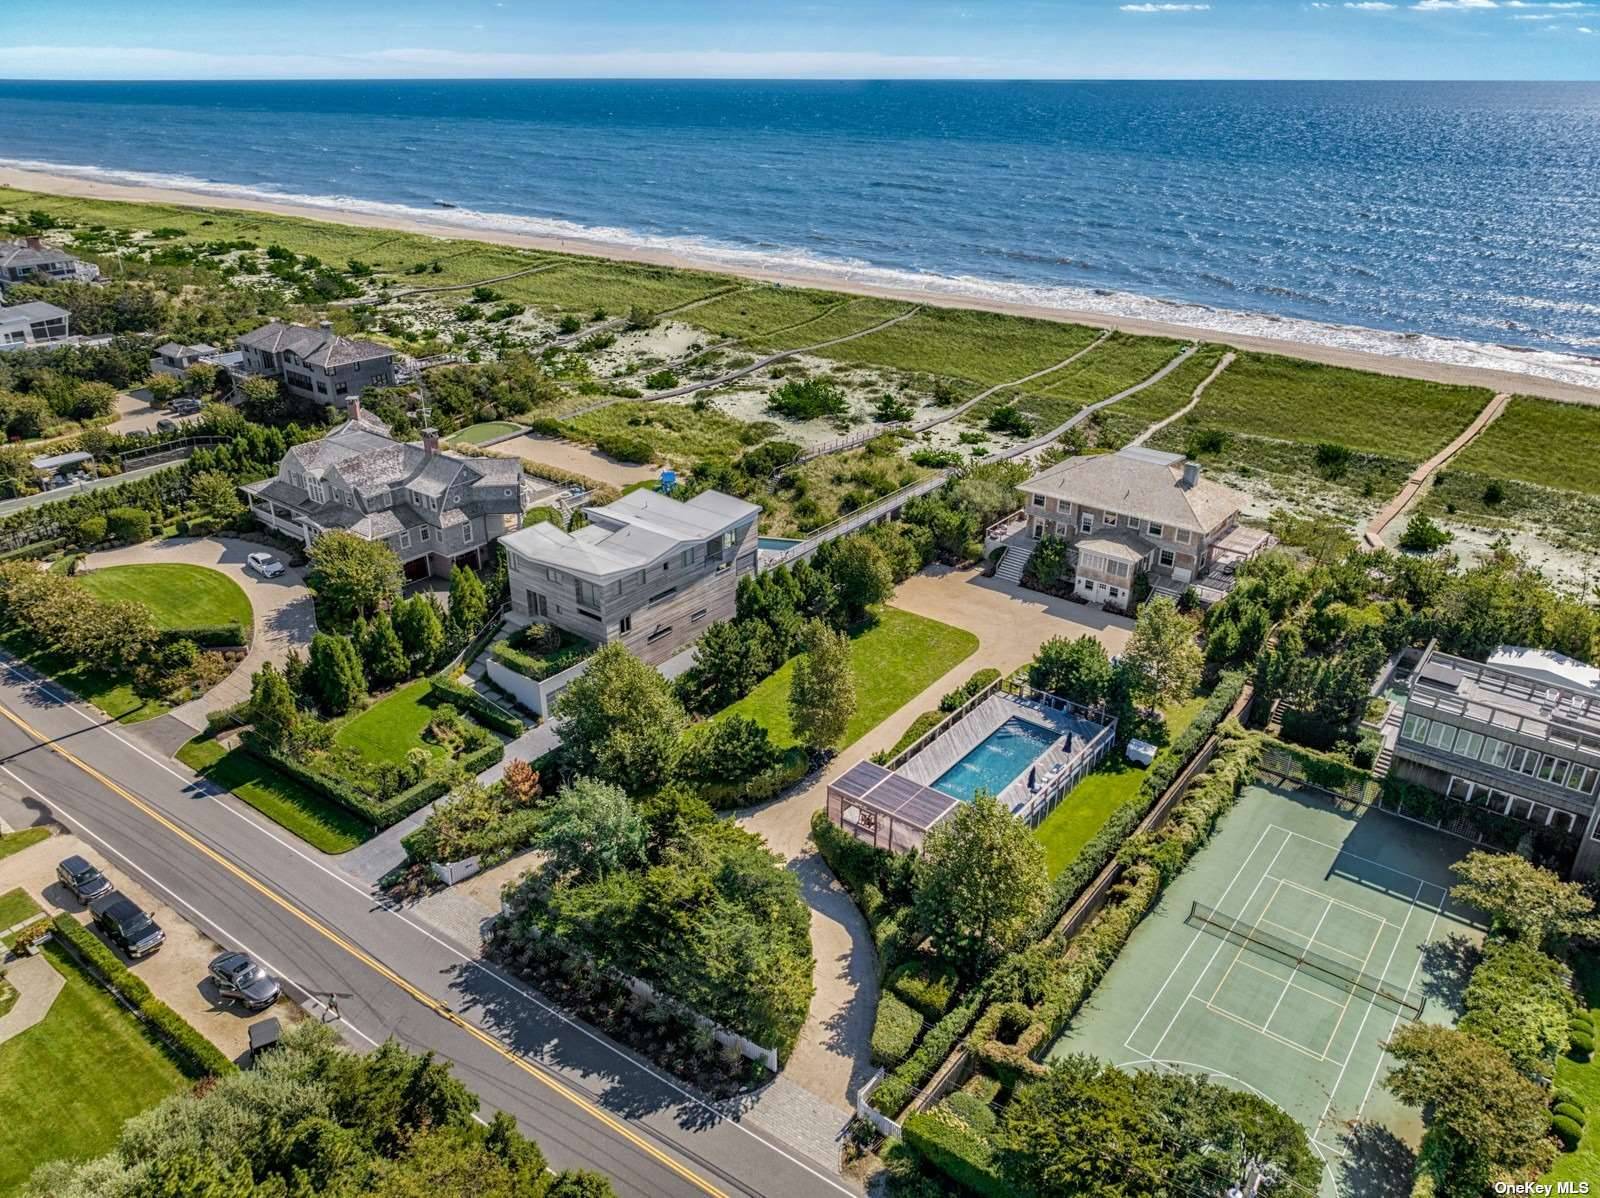 Located between the bridges in Westhampton Beach, this beautiful 1895 shingle sided home has been updated with luxury amenities while preserving some of its historic features.